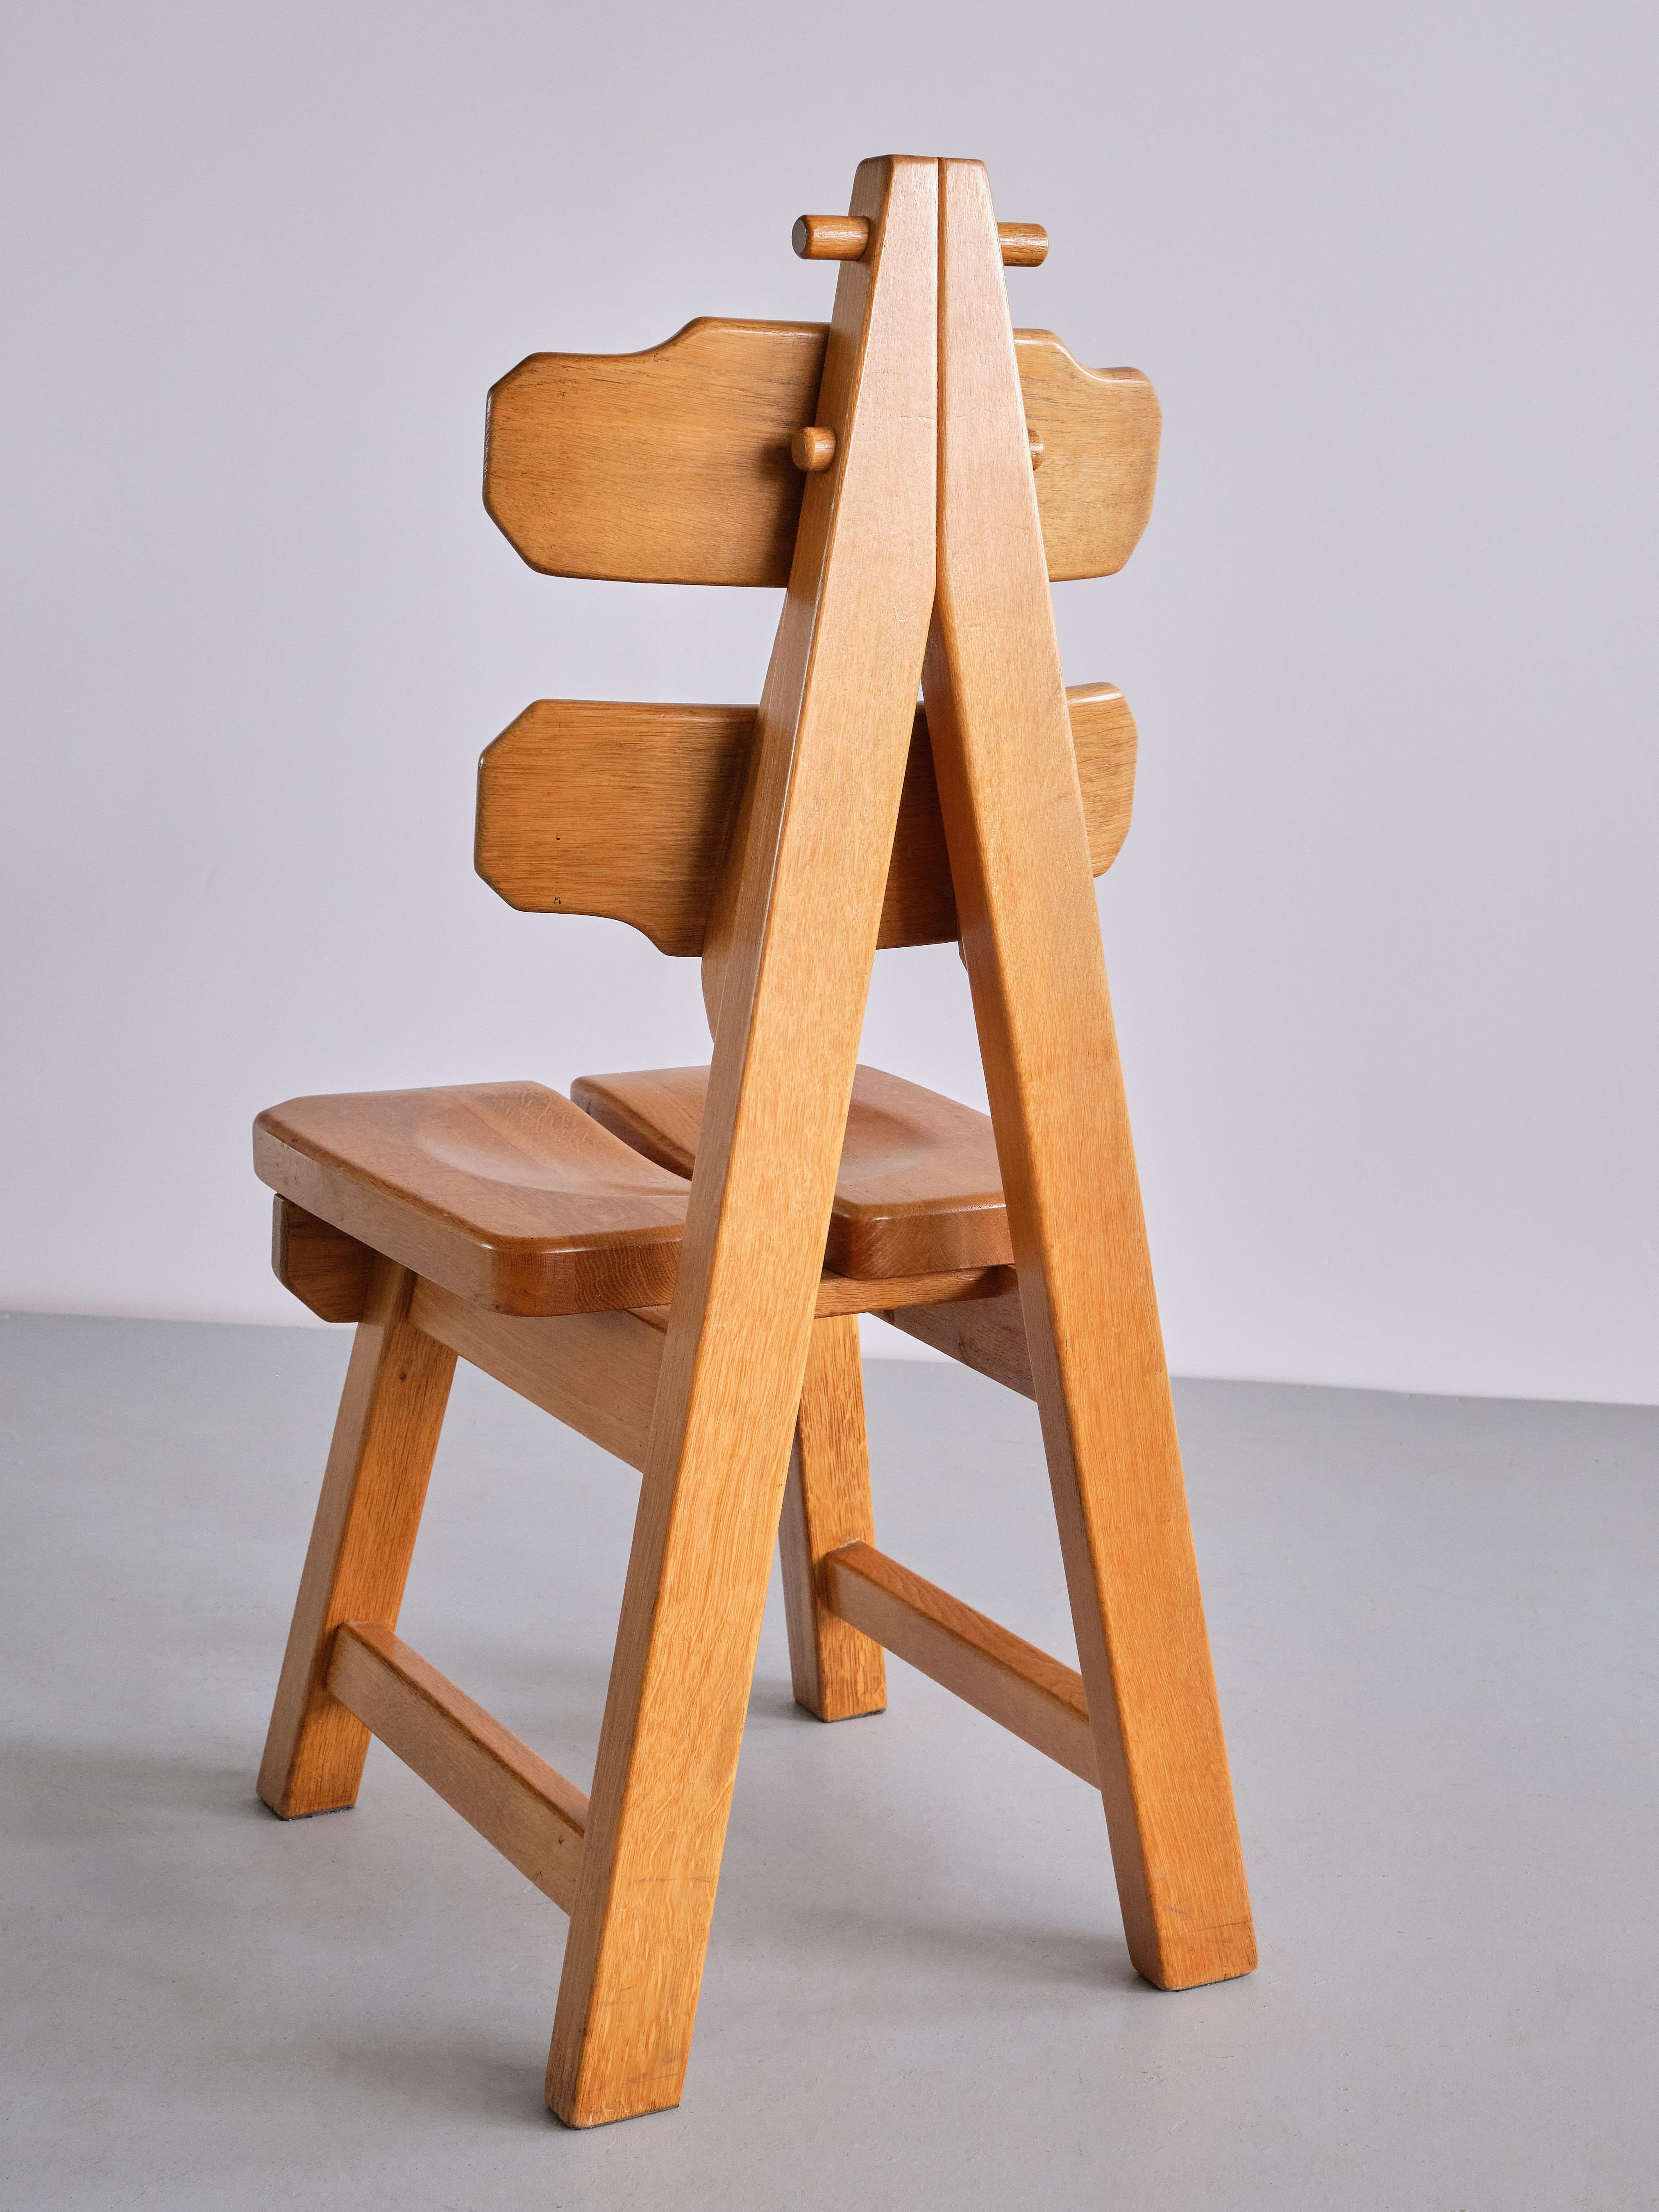 Sculptural Set of Six Brutalist Dining Chairs in Solid Oak, France, 1960s For Sale 8